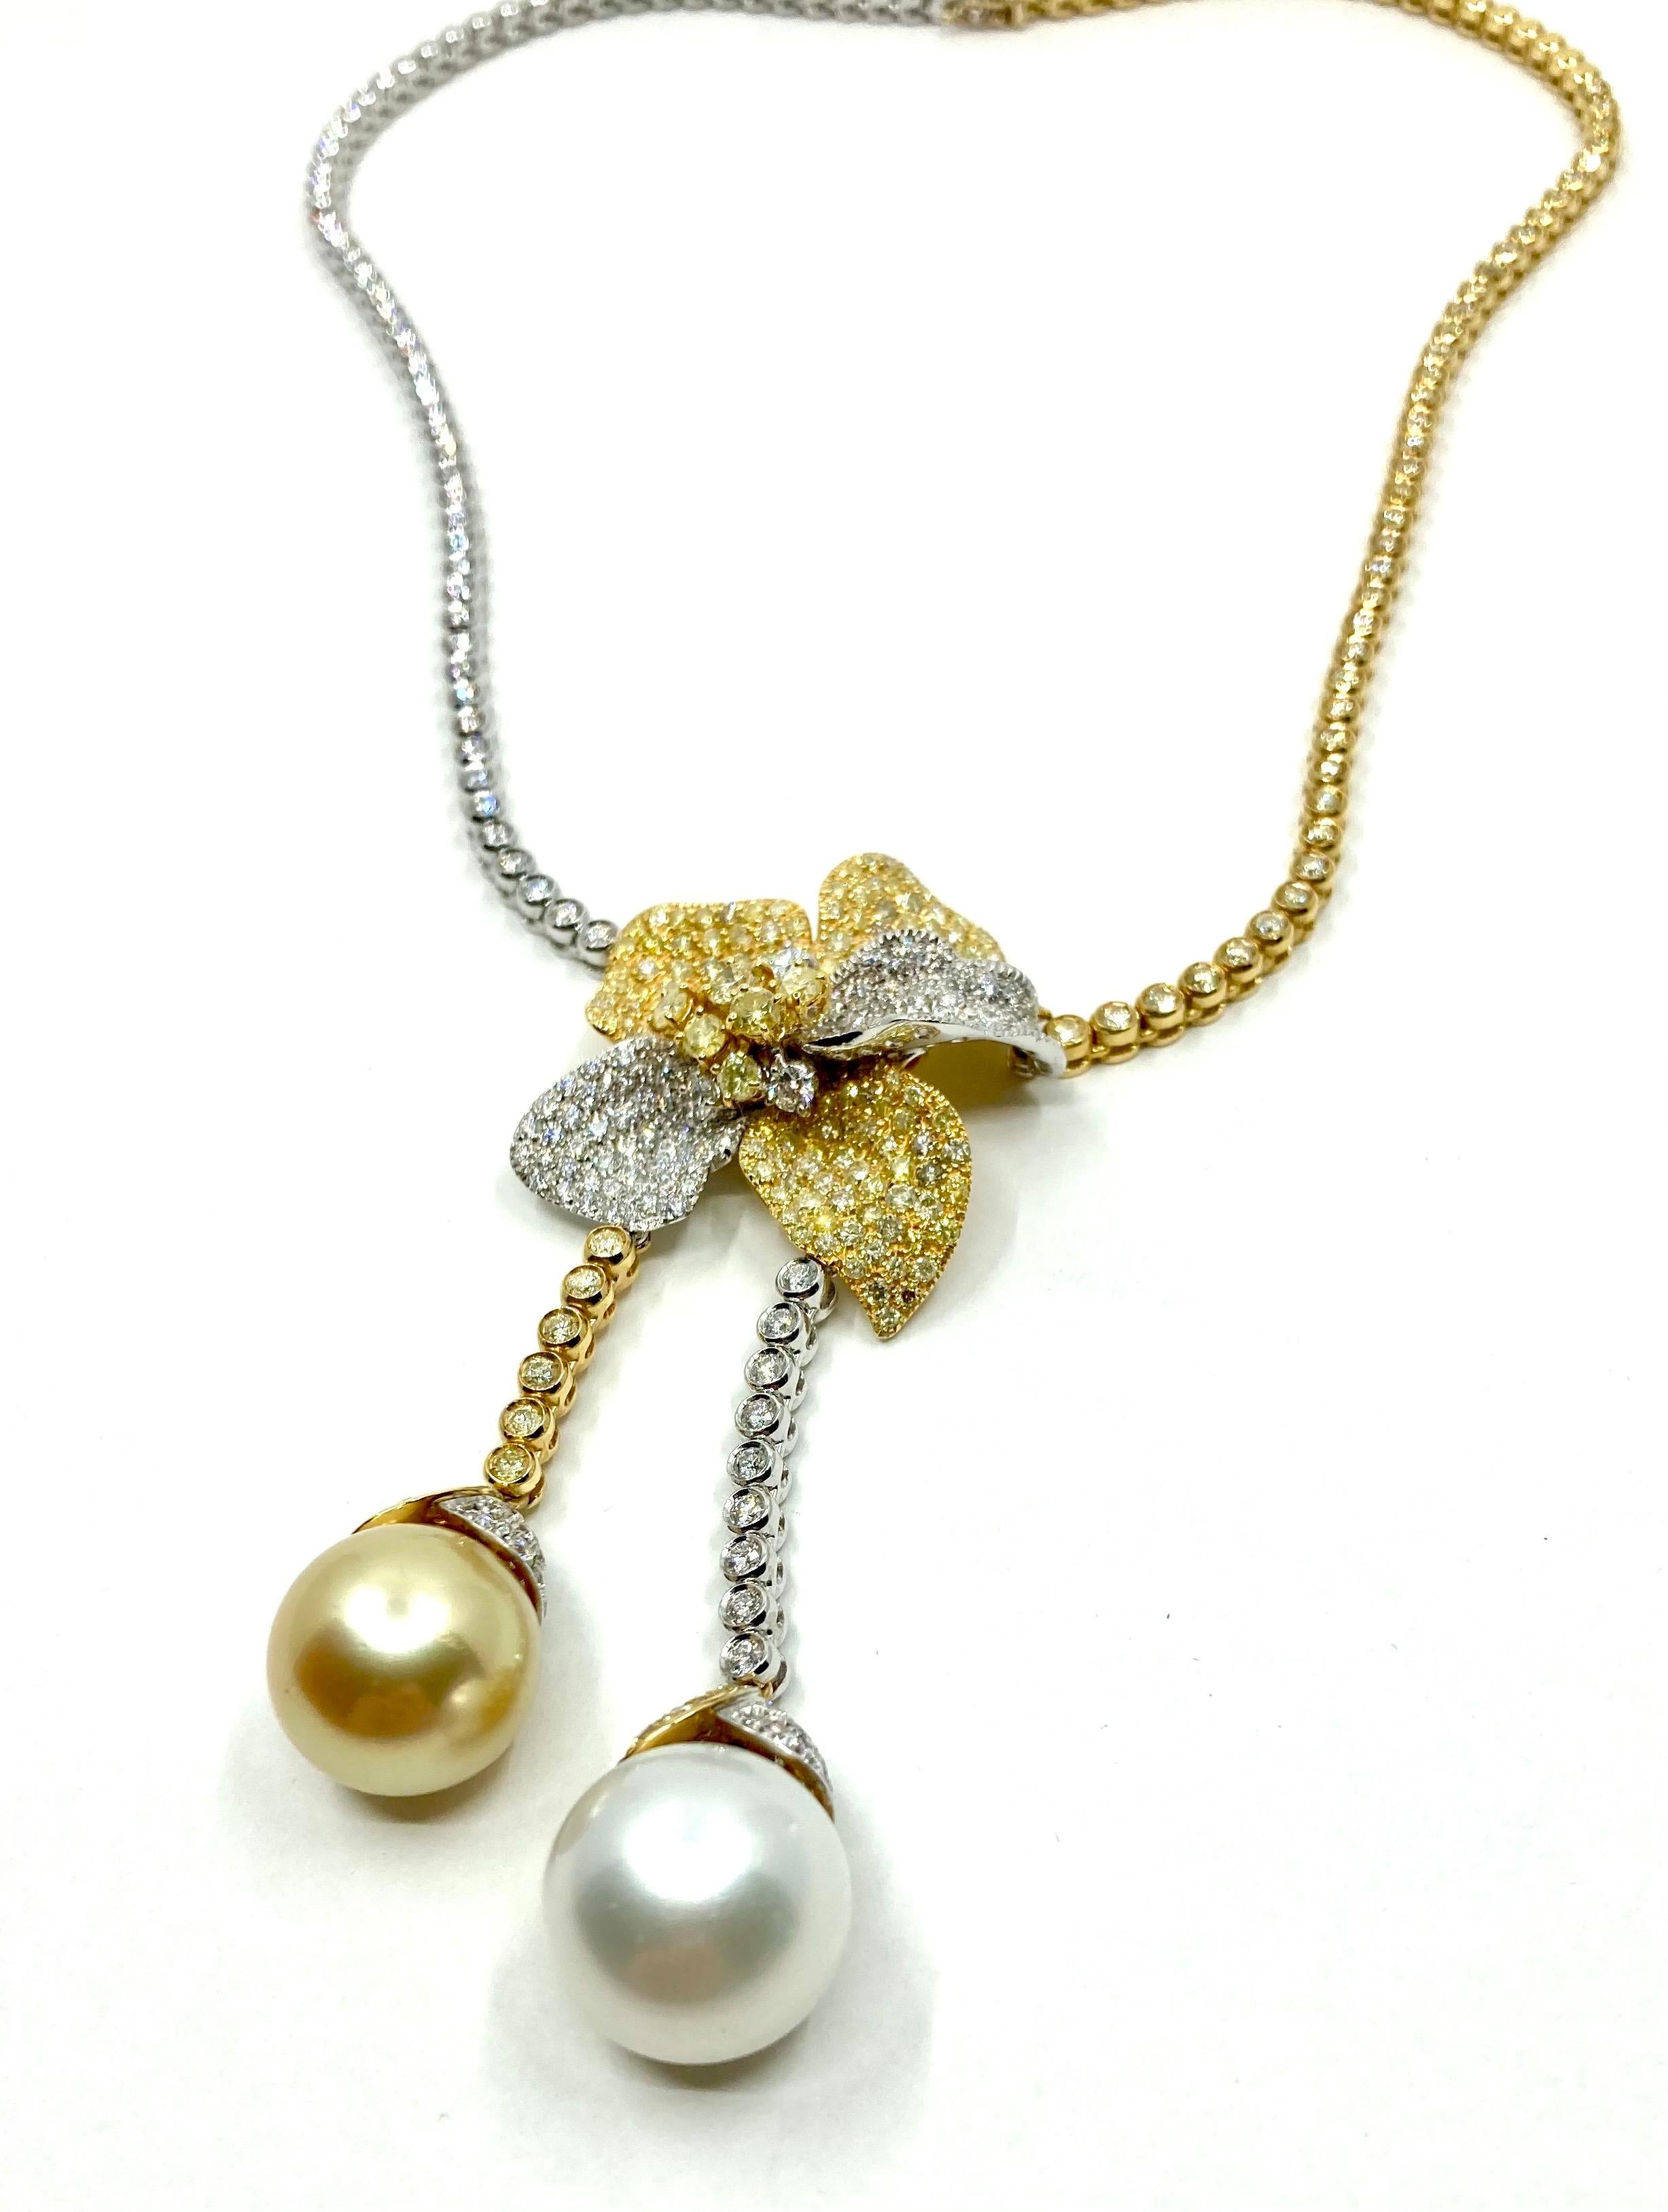 Exclusive fine timeless Yellow and White Gold Necklace, with South Sea White Pearl (15.90mm), South Sea Yellow Pearl (15.20mm), White Diamonds ct. 5.46 and Yellow Diamonds ct. 8.55, Made in Italy by Roberto Casarin. 

A unique piece in our